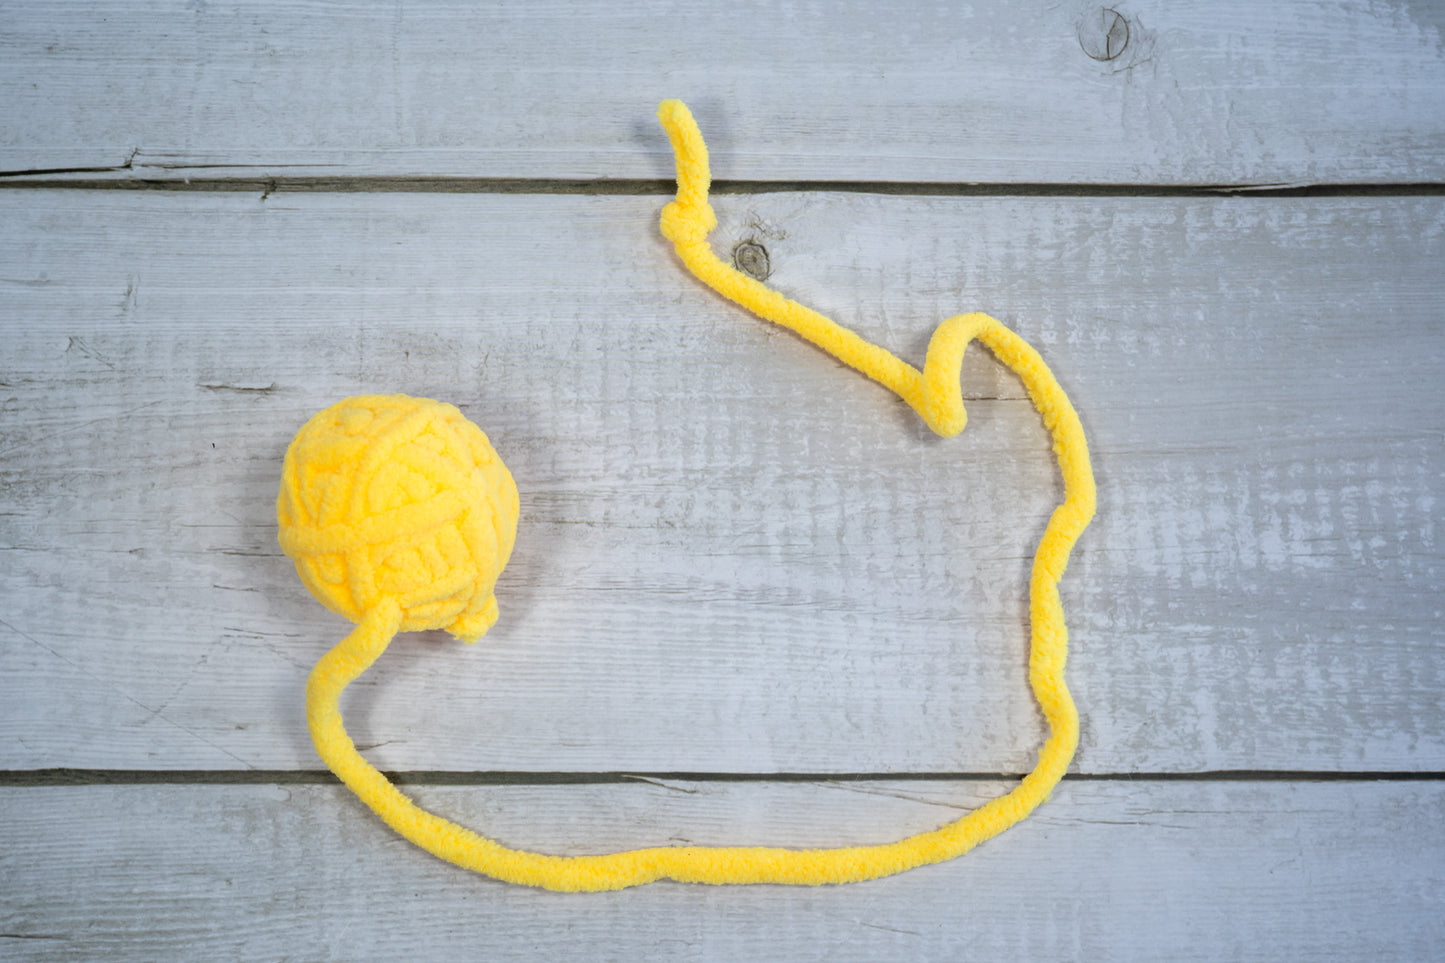 Small yellow wool ball with tail for cats.